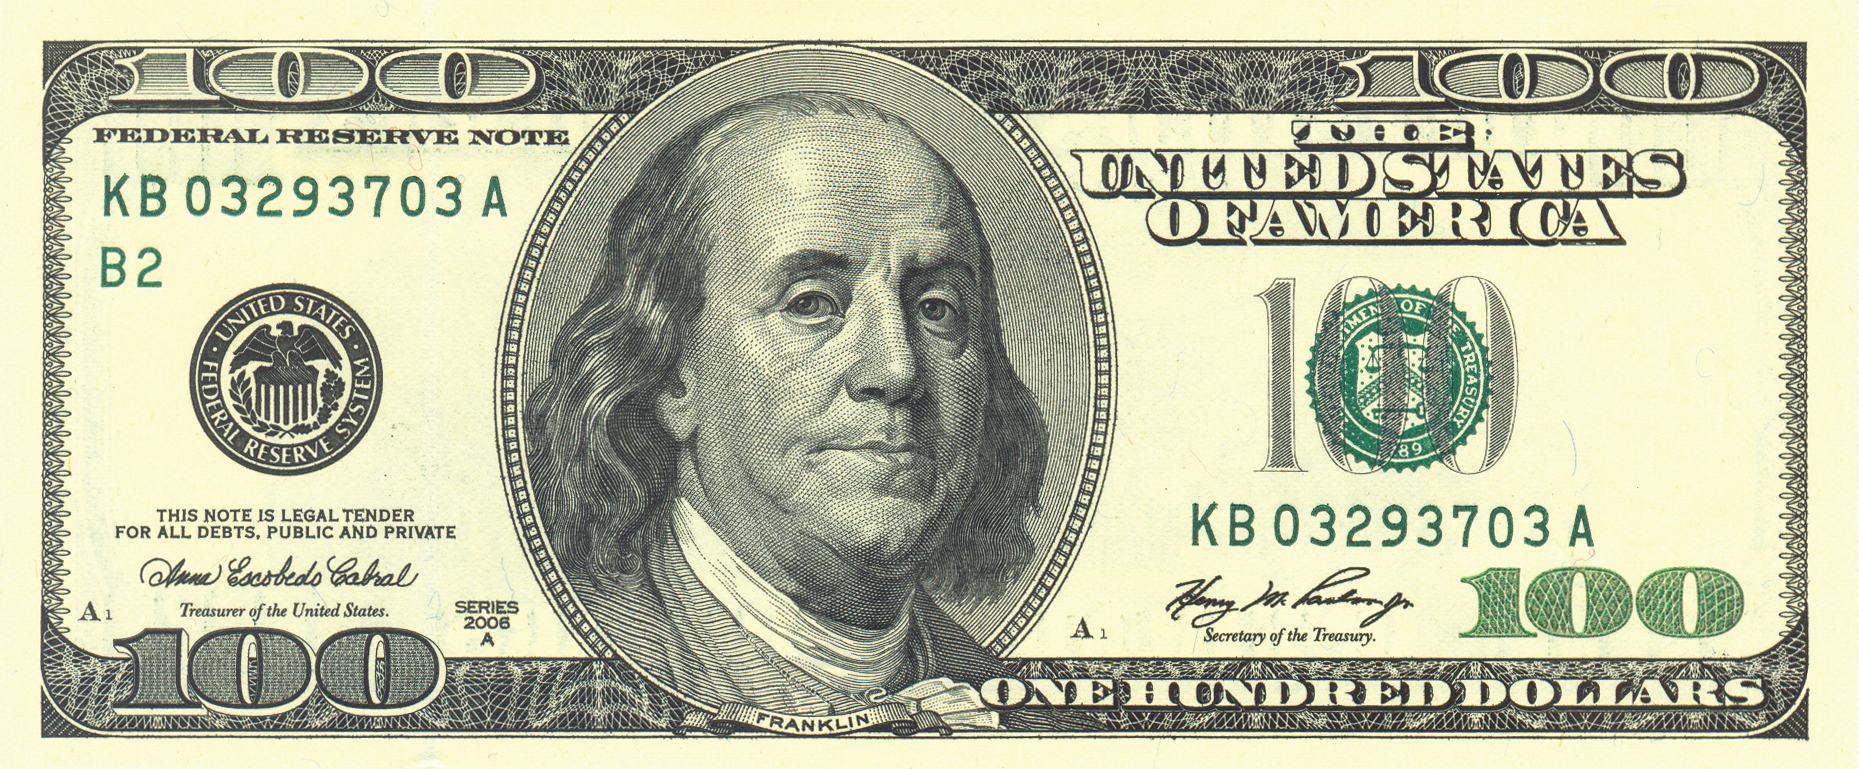 United States New Date 2006 A 100 Dollar Note Confirmed Banknotenews